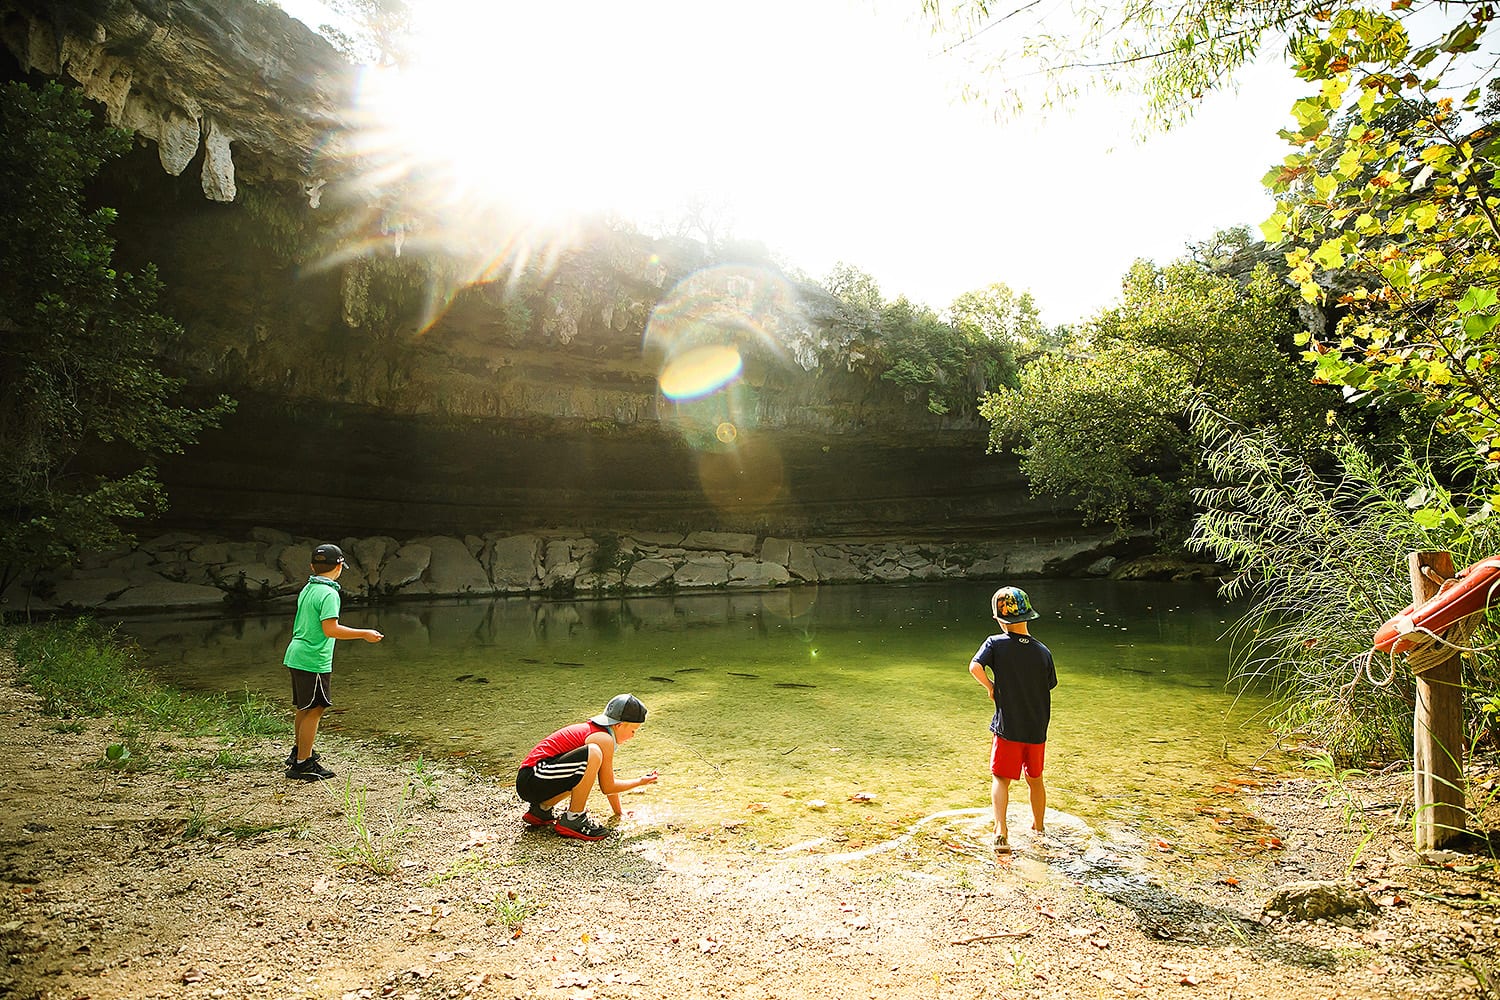 Hamilton Pool grotto Dripping Springs, Texas photo by Lauren Clark Photography